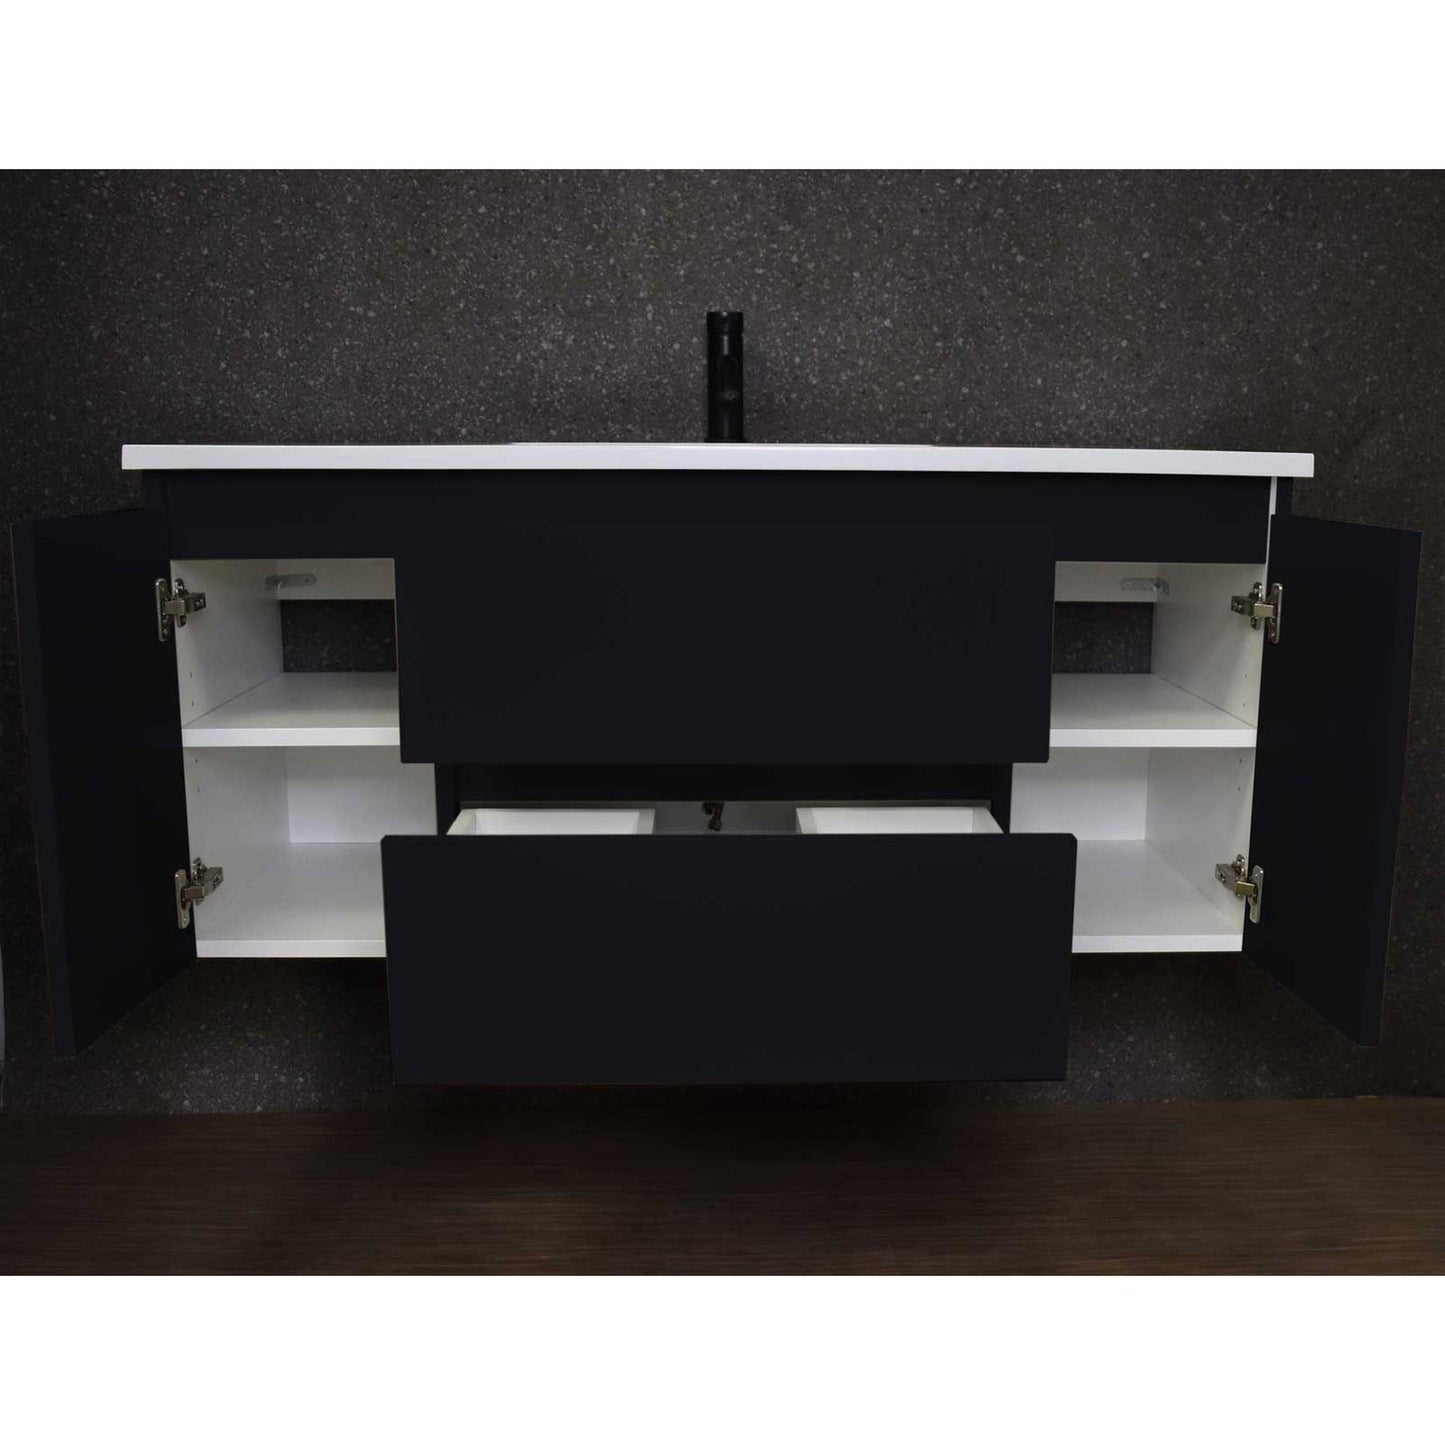 Volpa USA Salt 48" x 20" Black Wall-Mounted Floating Bathroom Vanity With Drawers, Acrylic Top and Integrated Acrylic Sink